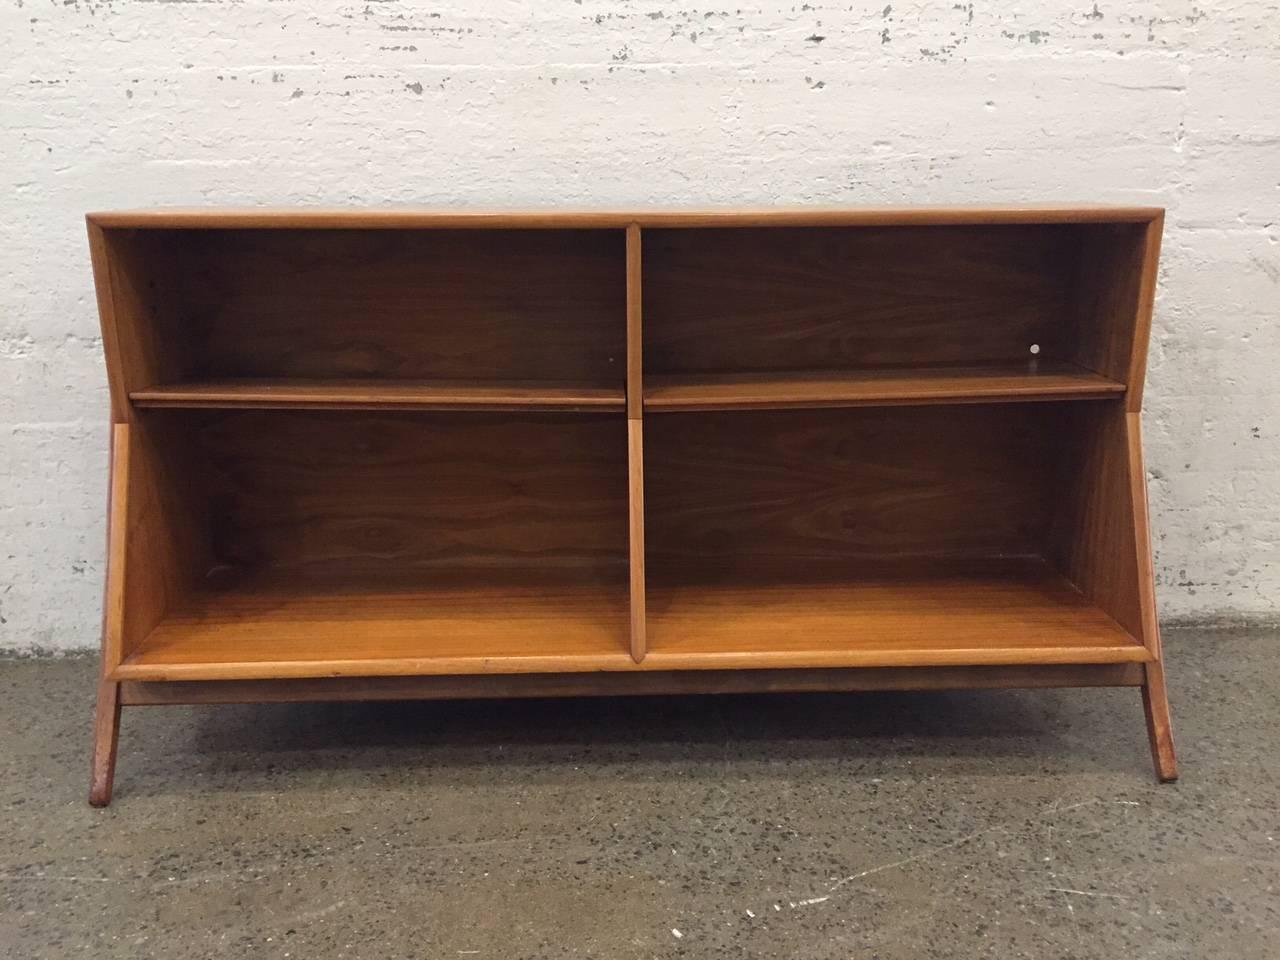 Open bookcase for Drexel by Stewart McDougall and Kipp Stewart. Item is walnut with sculptural sides. Has adjustable shelves.
The depth of the bottom is 17.5